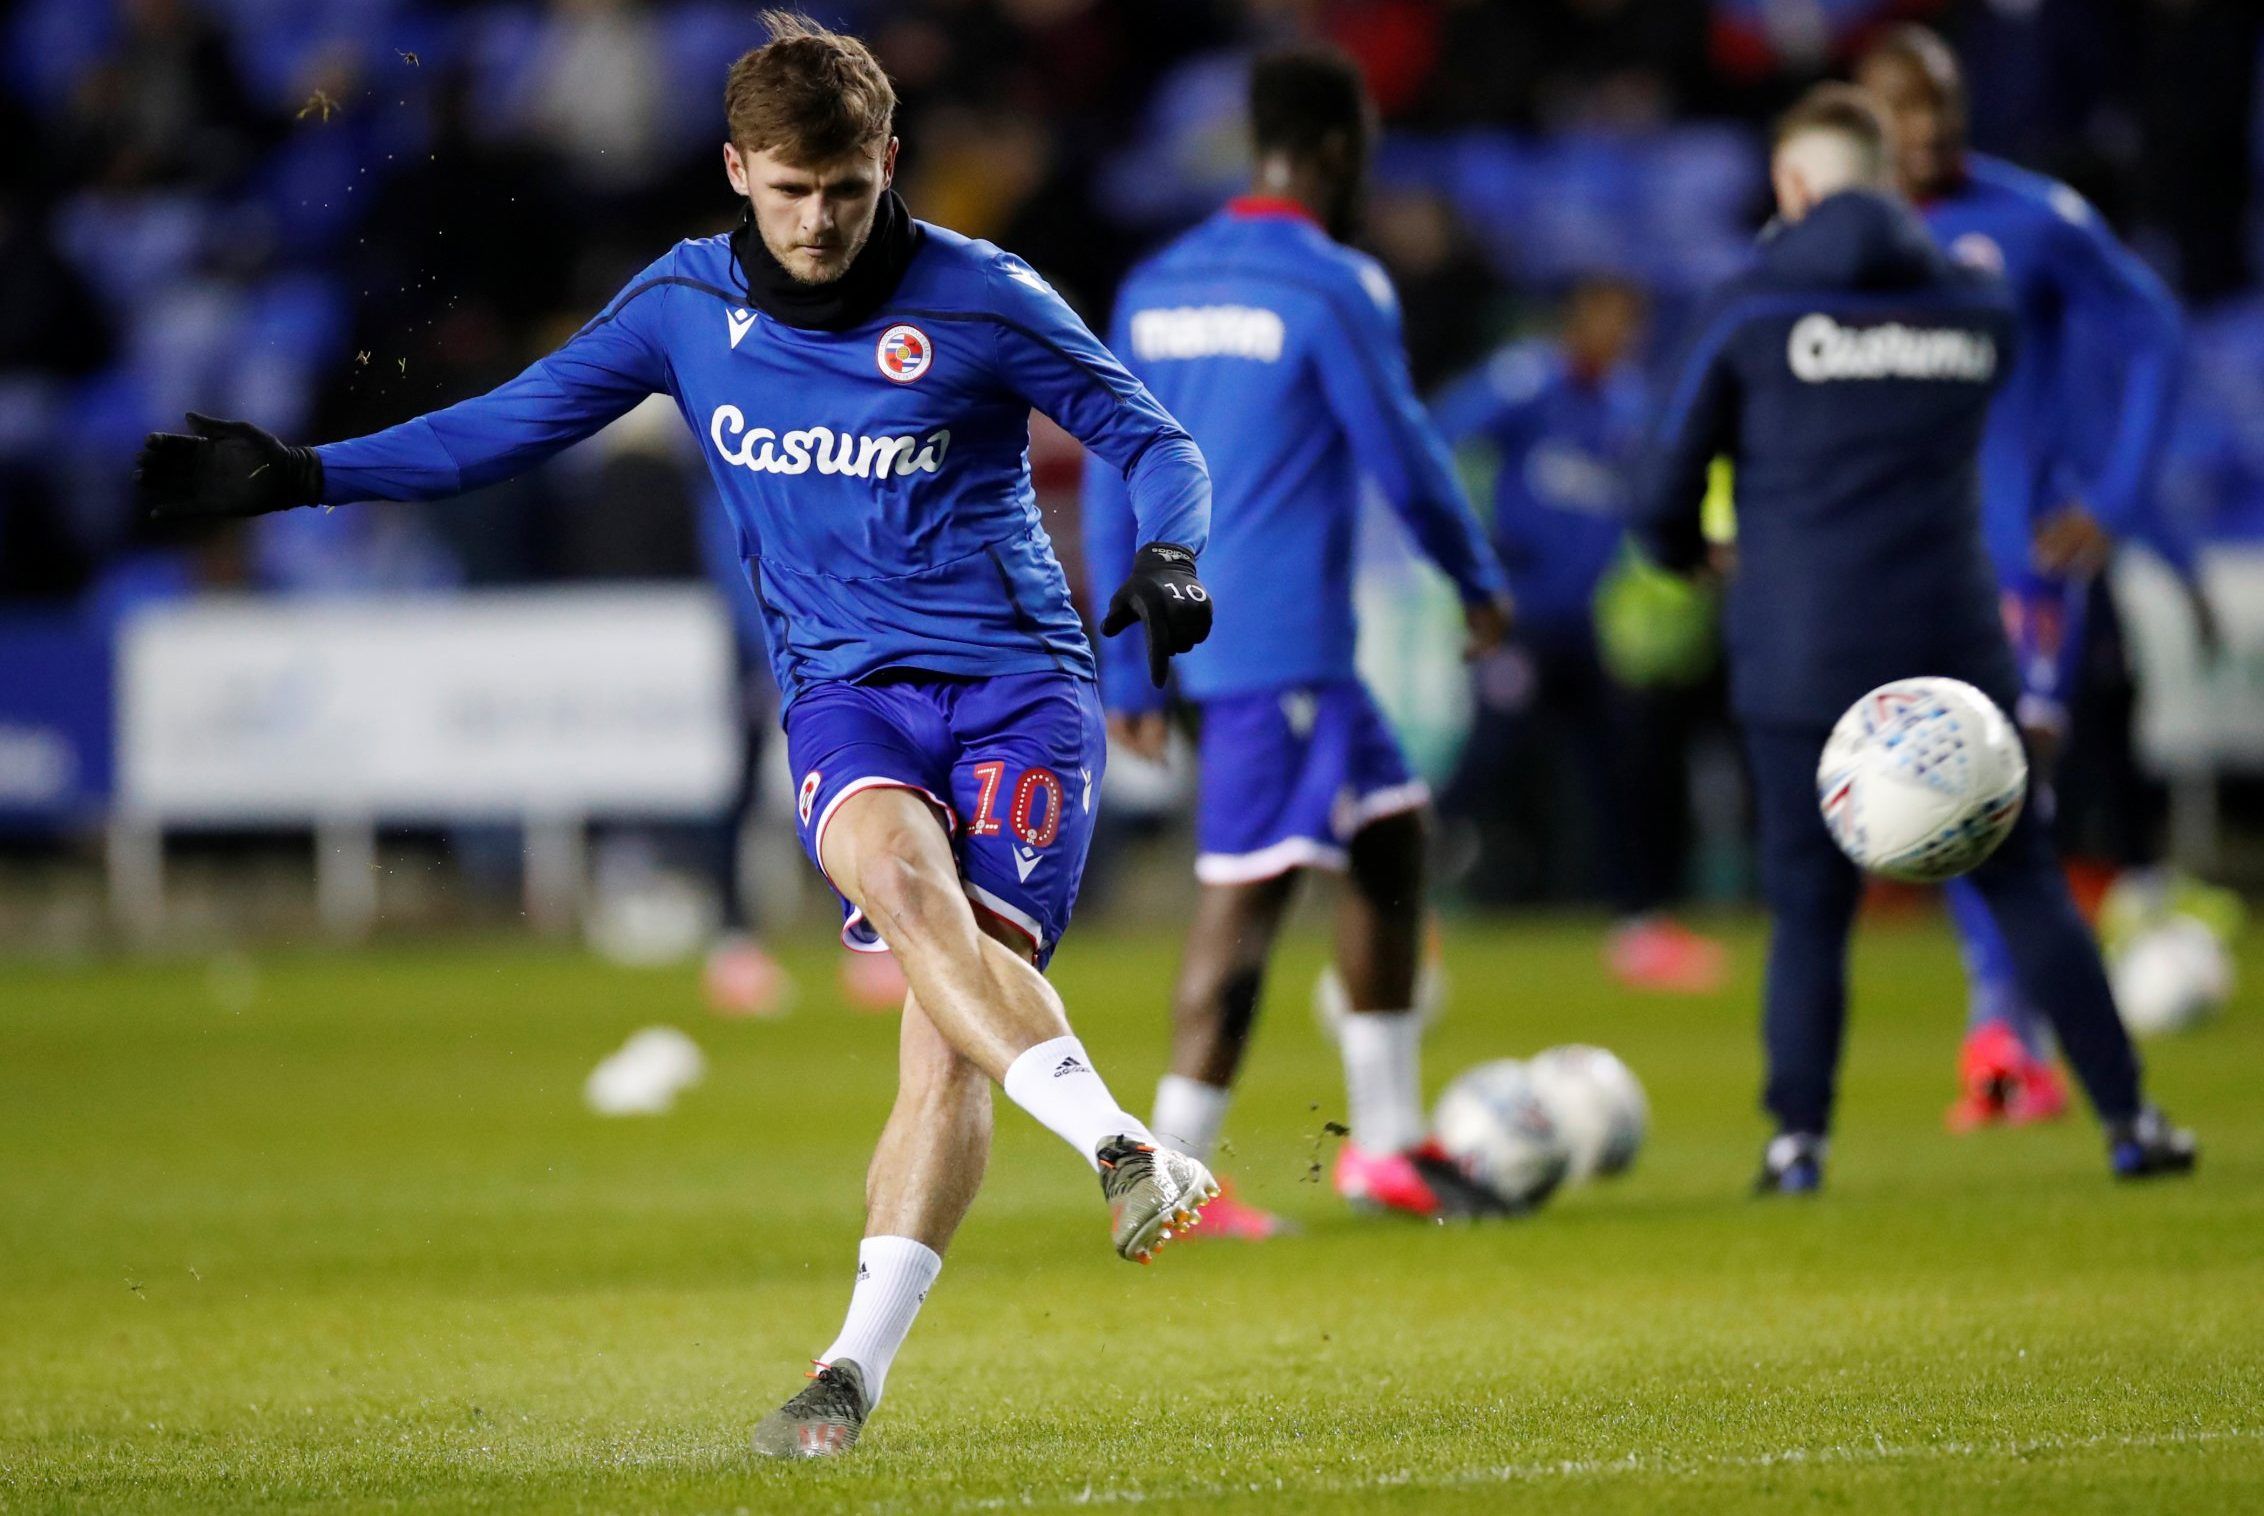 Reading midfielder John Swift during warm up before Championship clash with West Brom